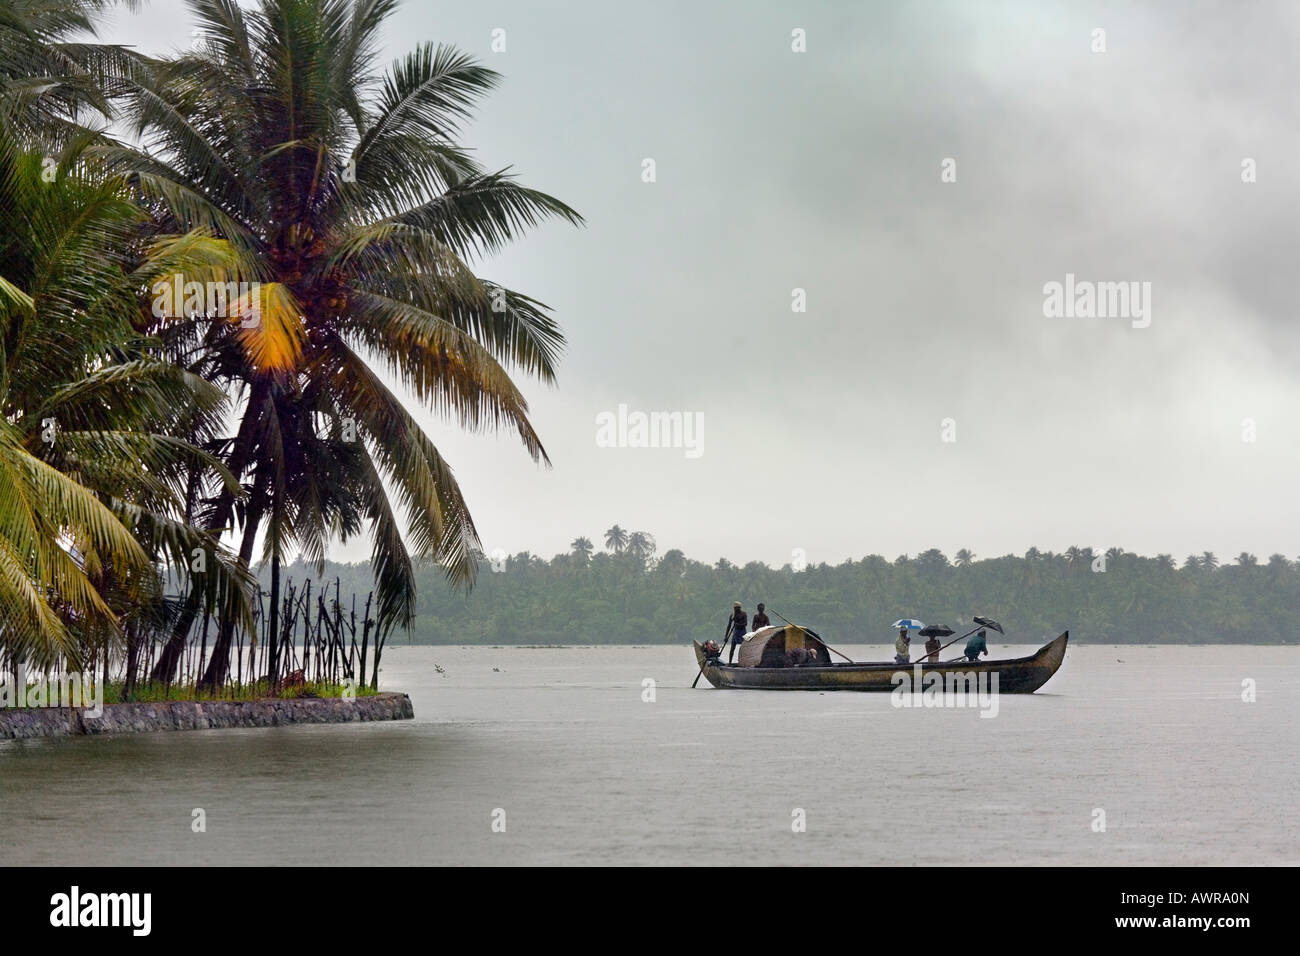 A kettuvallam traditional grain barge on Kerala Backwaters lined with dense tropical greenery Kerala South India Stock Photo